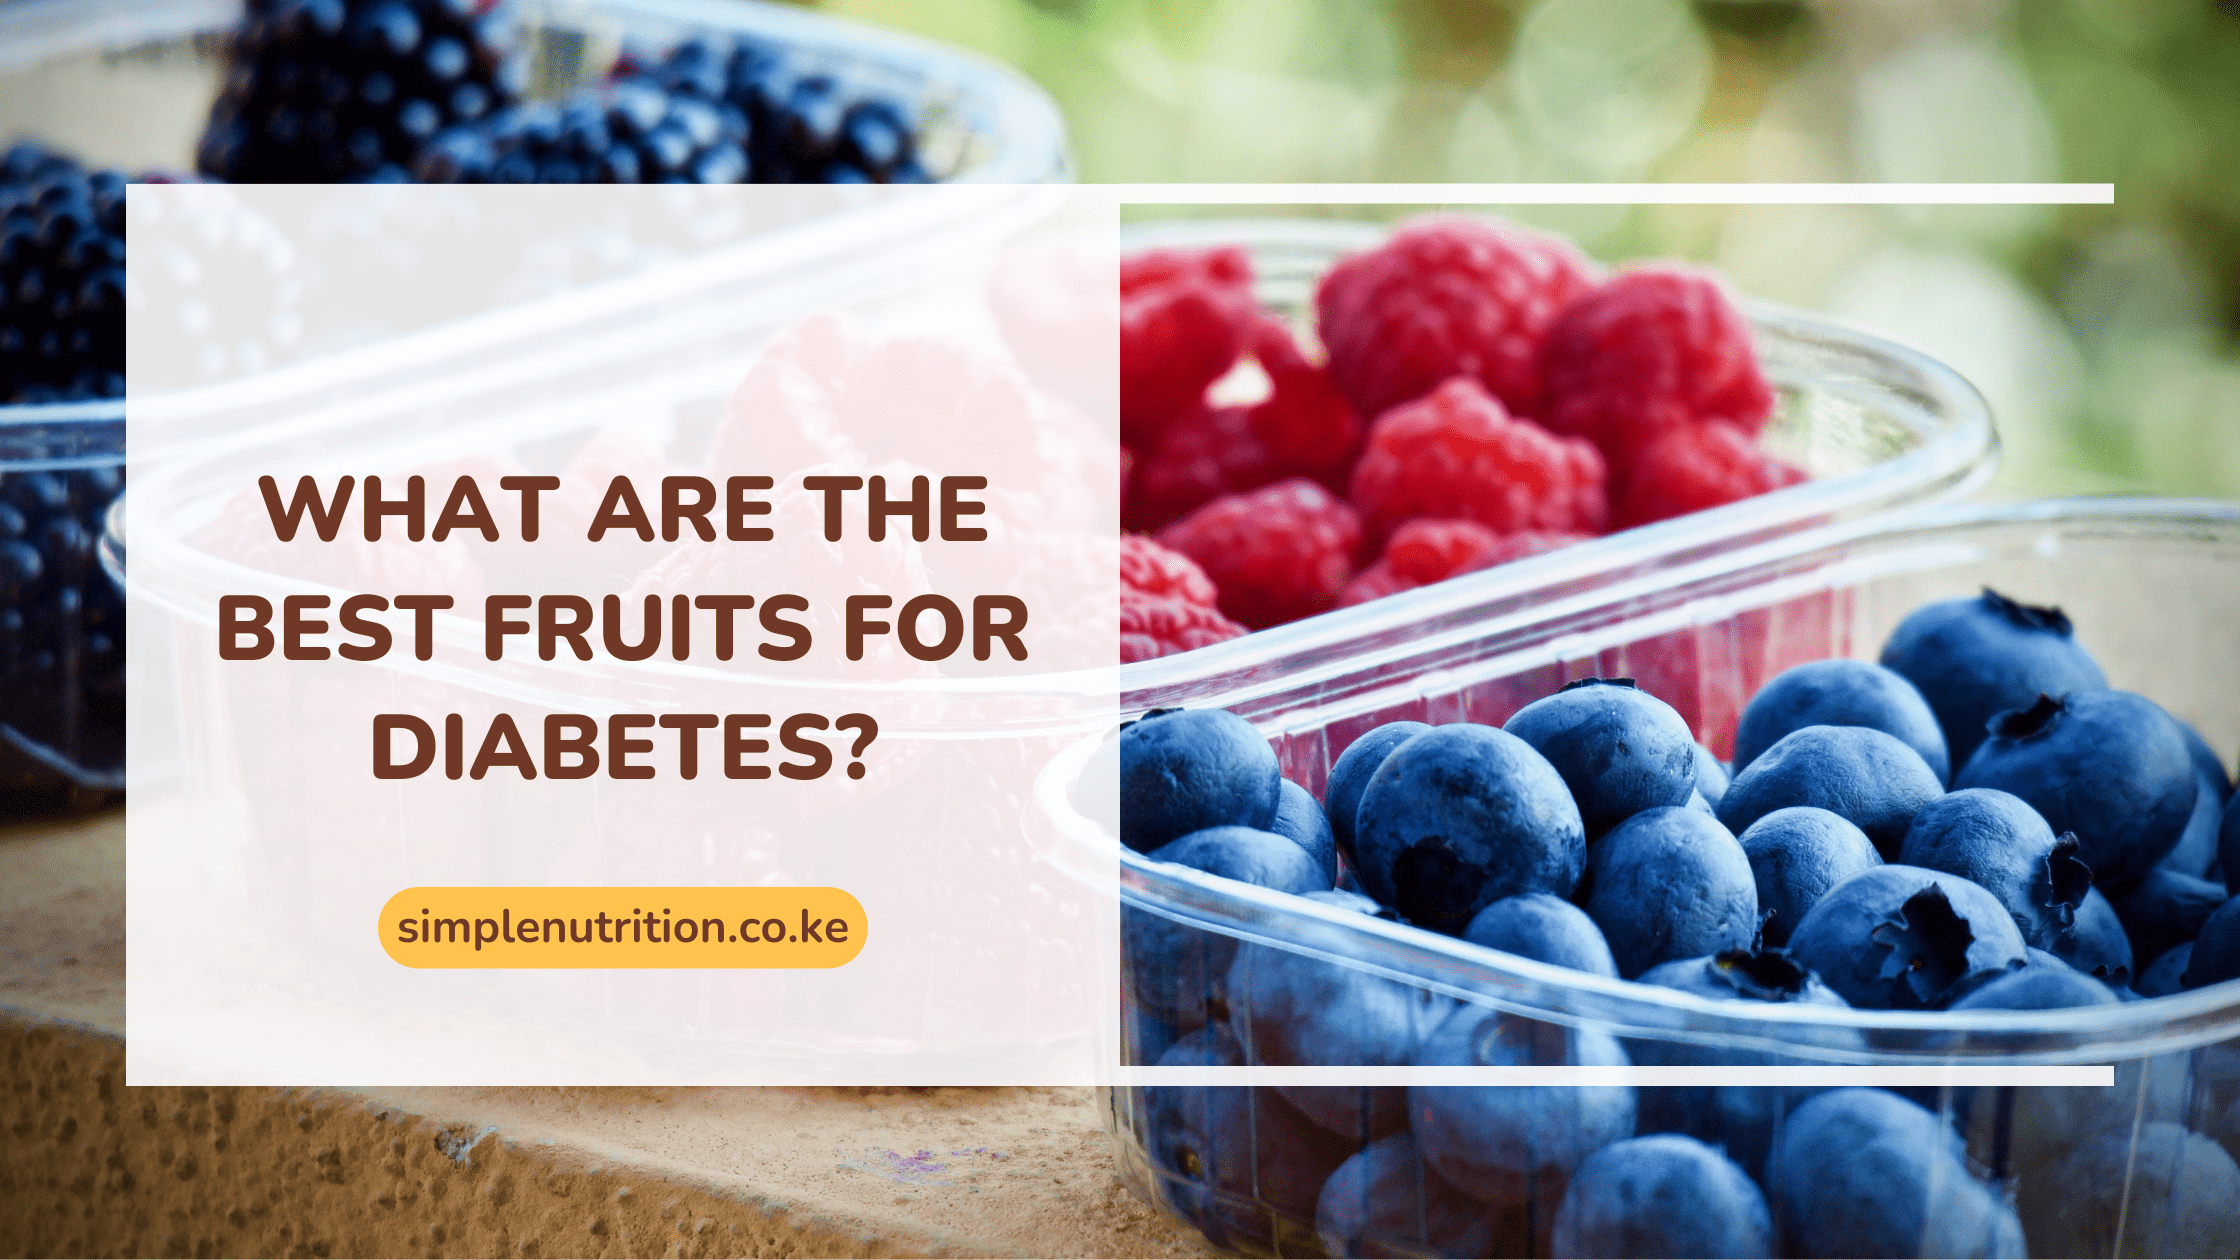 What are the best fruits for diabetes?